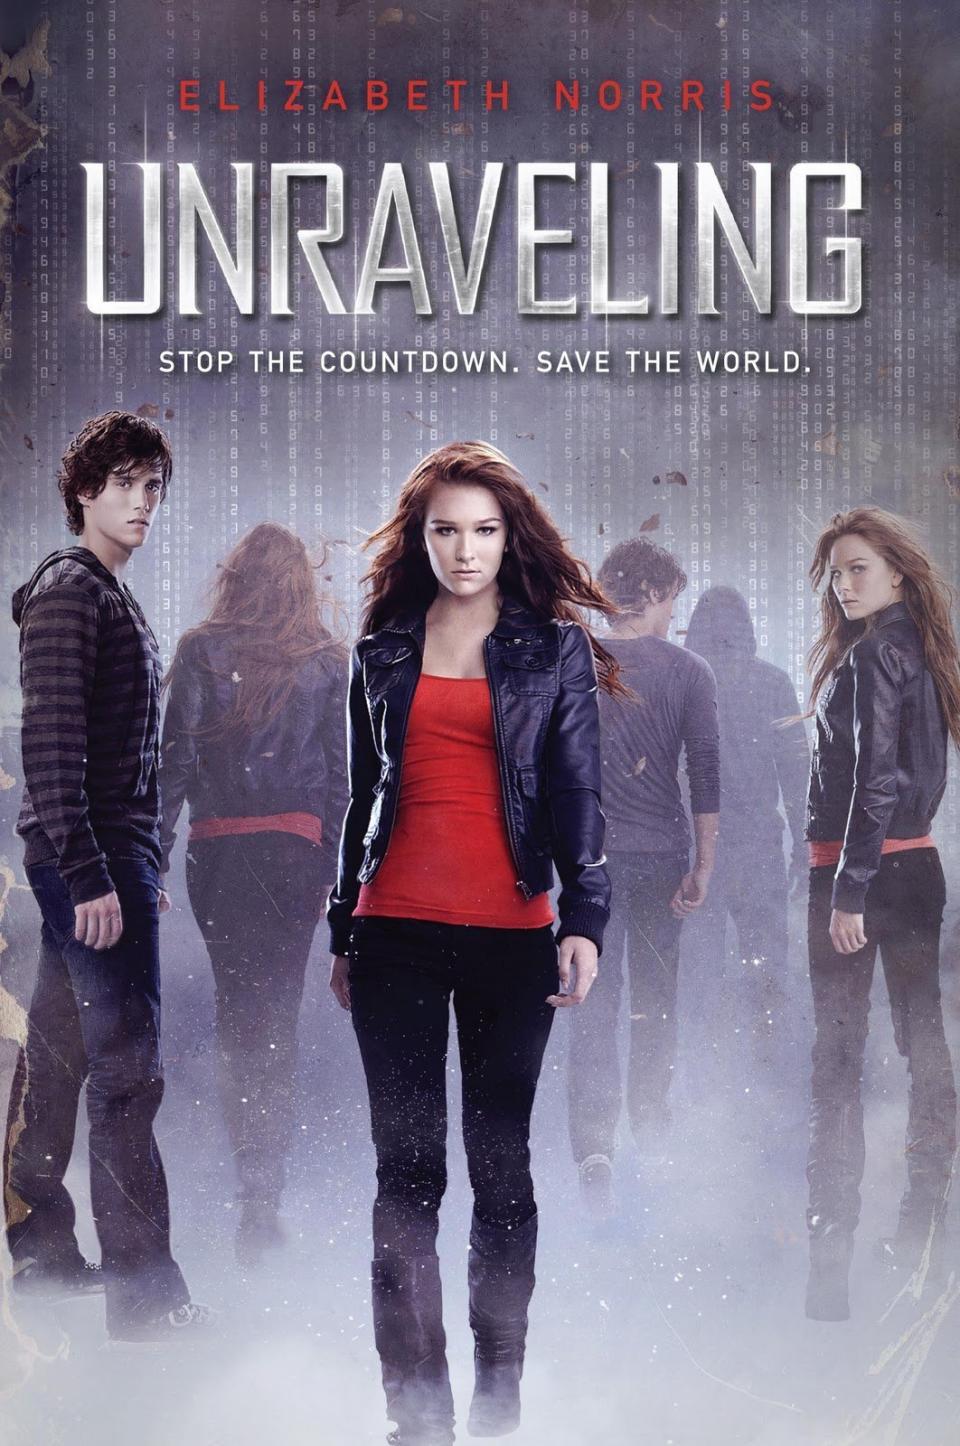 At the start of "Unraveling," Janelle Turner is killed—but a boy from another universe saves her, breaking all sorts of physics rules, and a countdown to the world's end begins. "Unraveling" and its sequel, "Unbreakable," ramp up the science fiction with doppelgangers and journeys into alternate dimensions, but just like Tris, Janelle has to figure out where she belongs when her world is falling apart (a little more literally in Janelle's case.) Plus, Janelle and Ben are just as steamy a pairing as Tris and Four. 